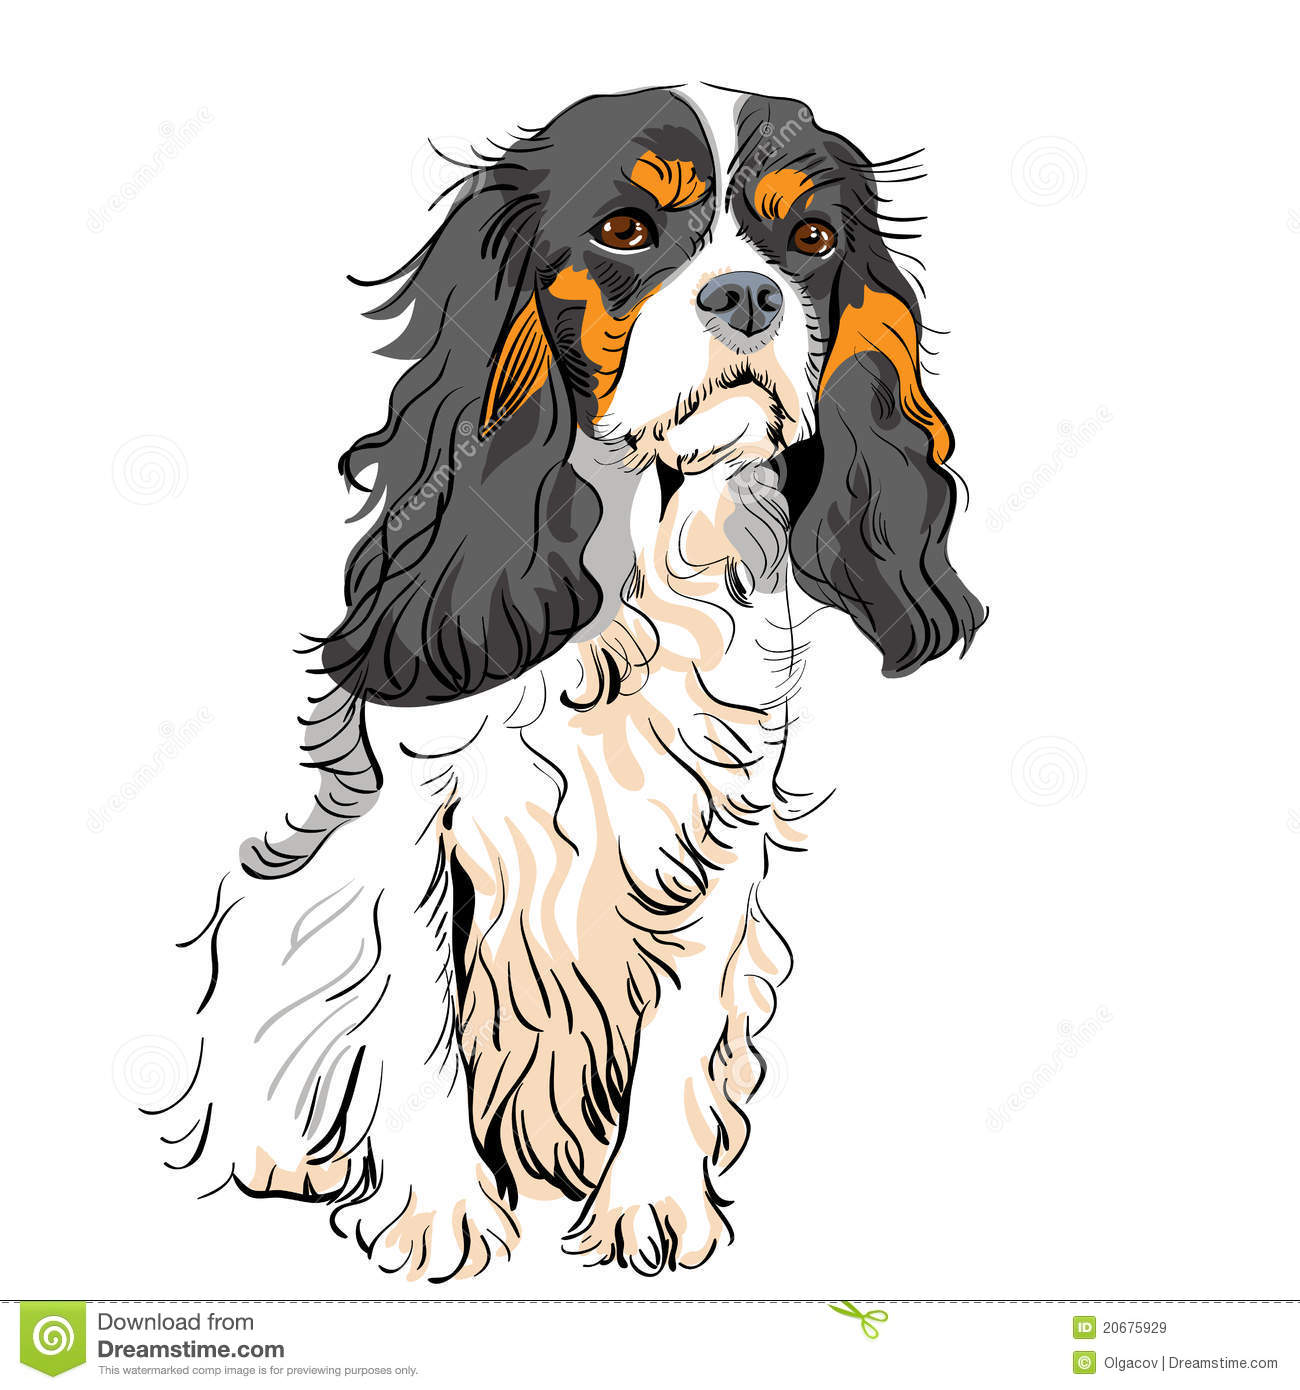 Cavalier king charles clipart.